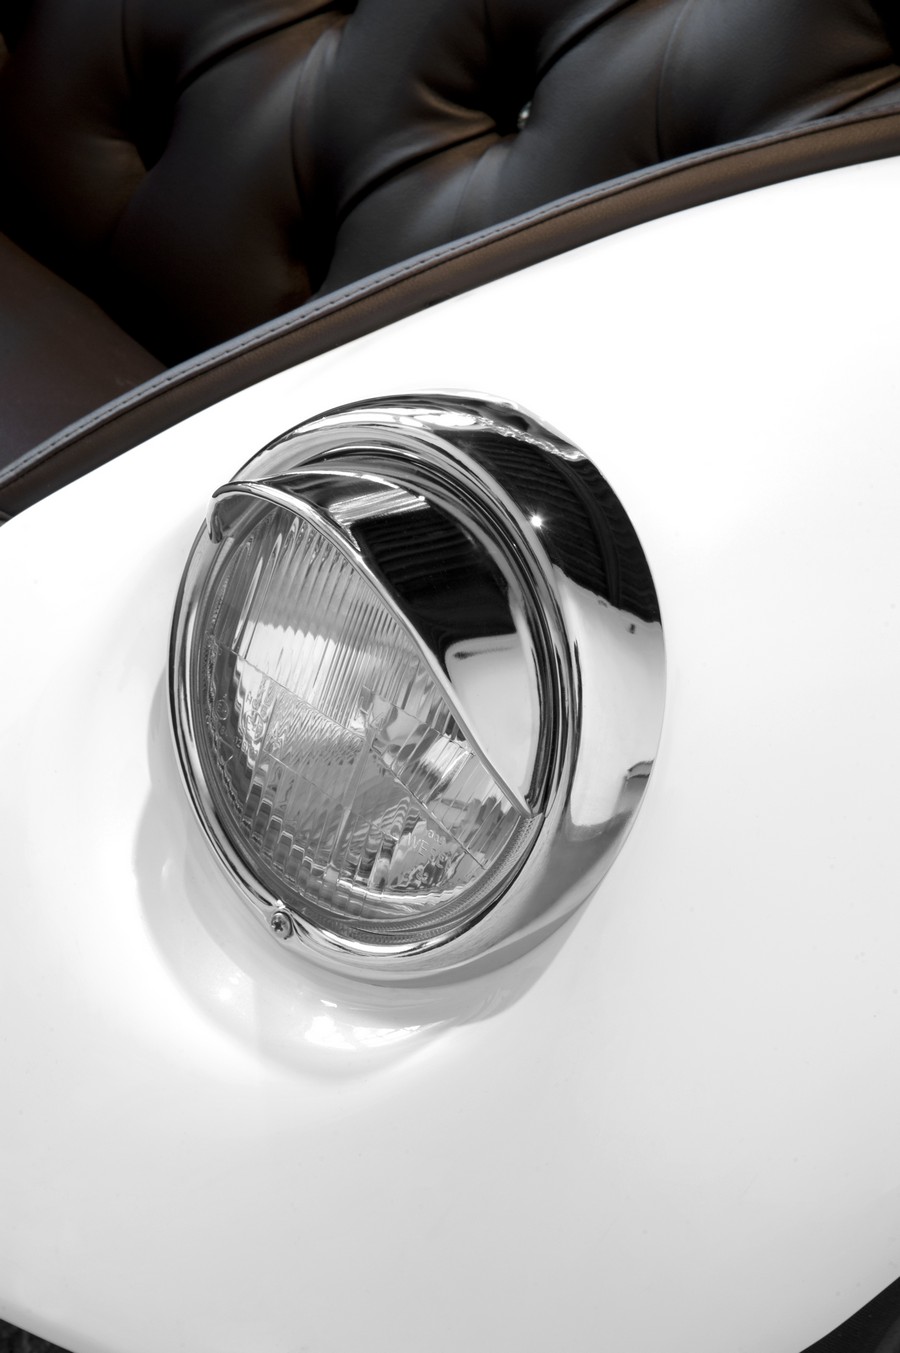 Led headlights of the automobile armchair